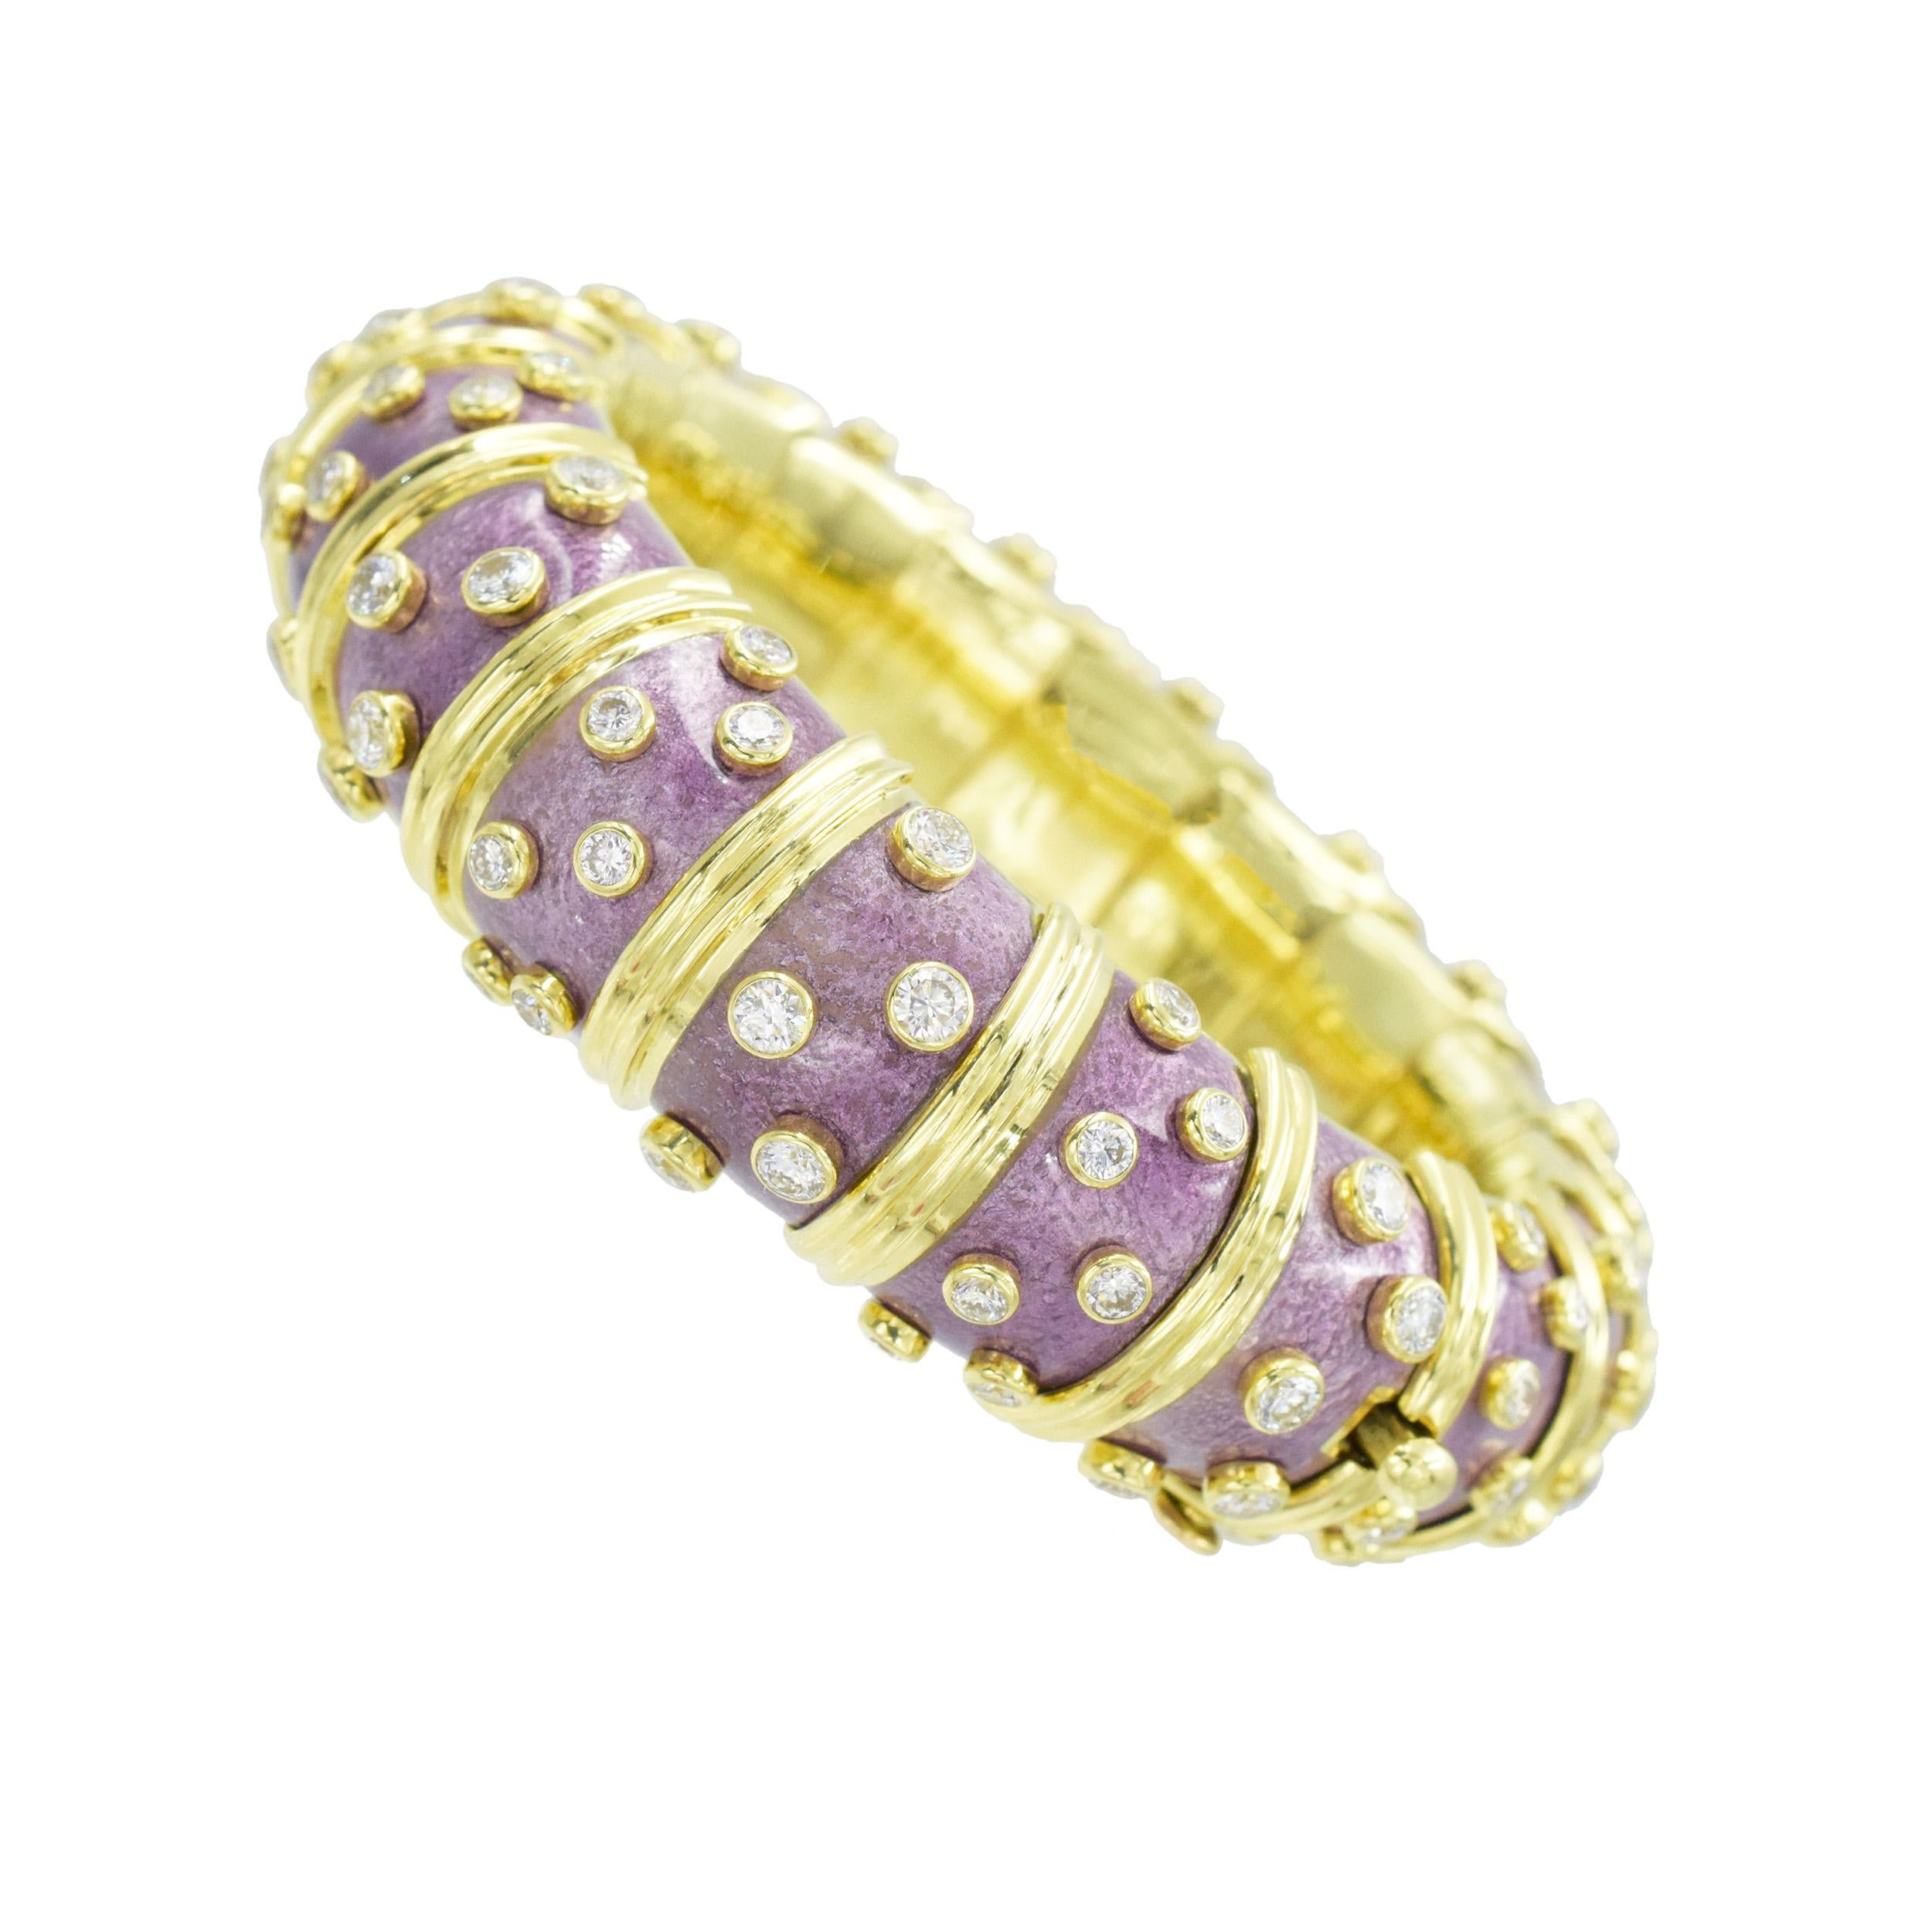 Tiffany & Co. Schlumberger diamond and enamel bangle in 18k yellow gold. 
The bangle is inlaid with lavender purple paillonné enamel, scattered with 108 round brilliant cut diamonds with total weight of approximately 6.00ct, color E-F, clarity